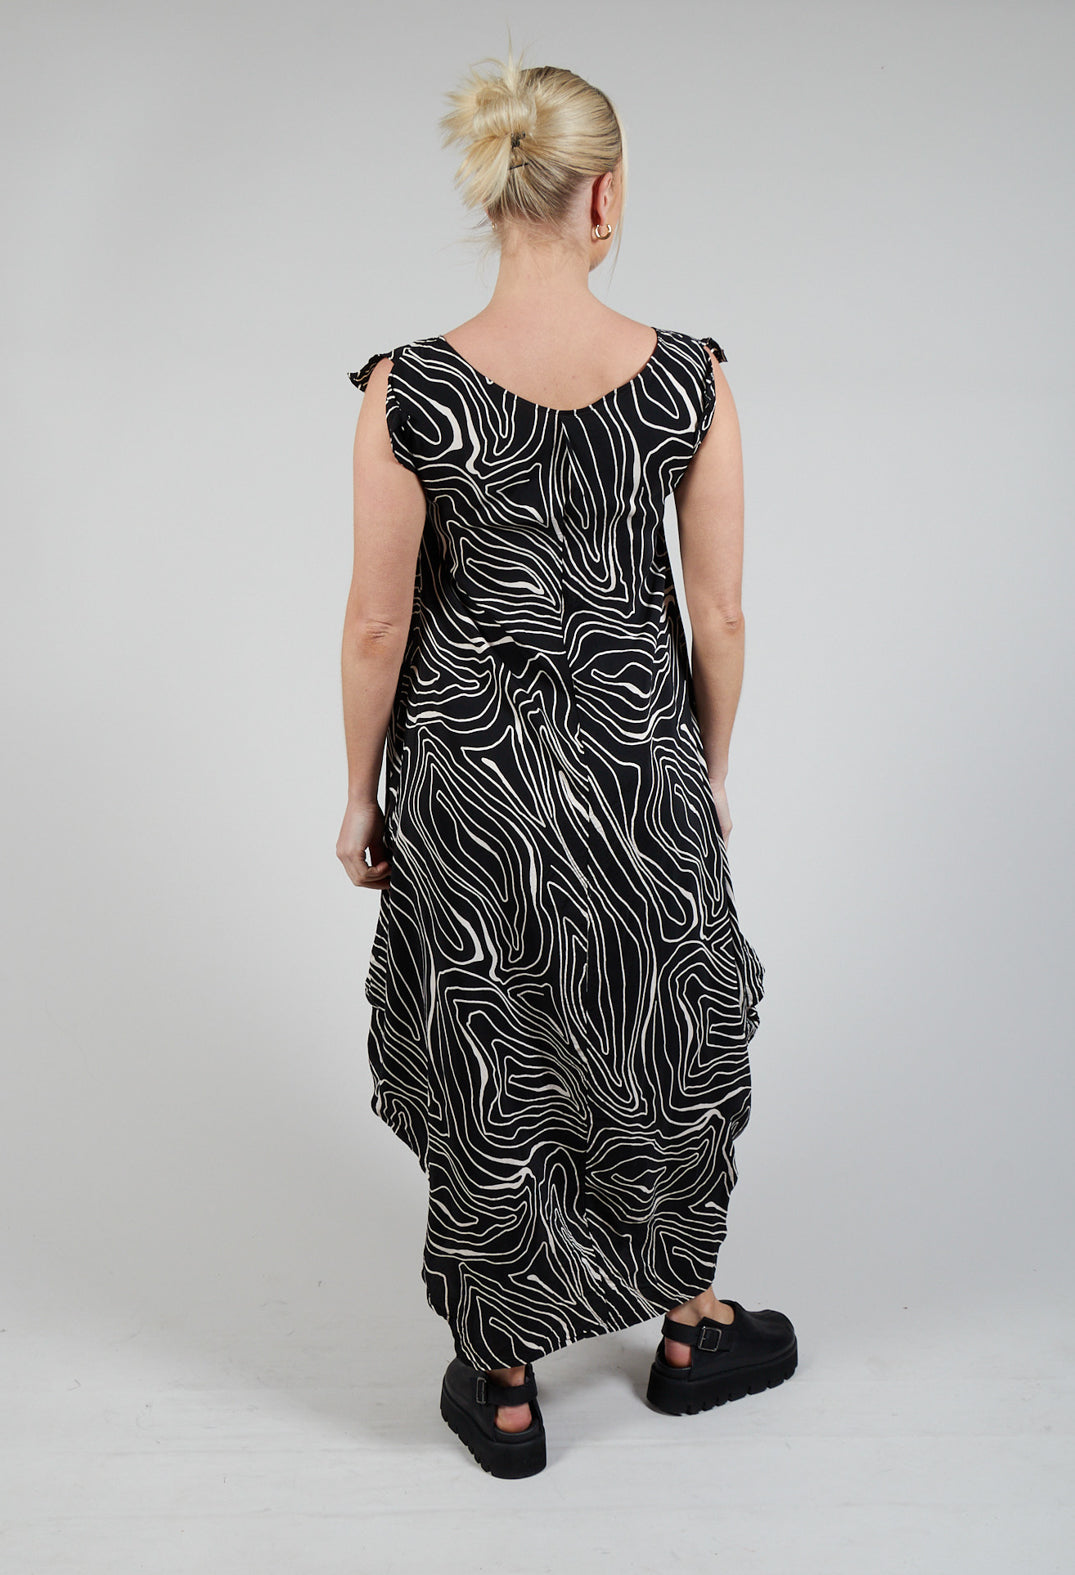 GRKO Dress in Black with White